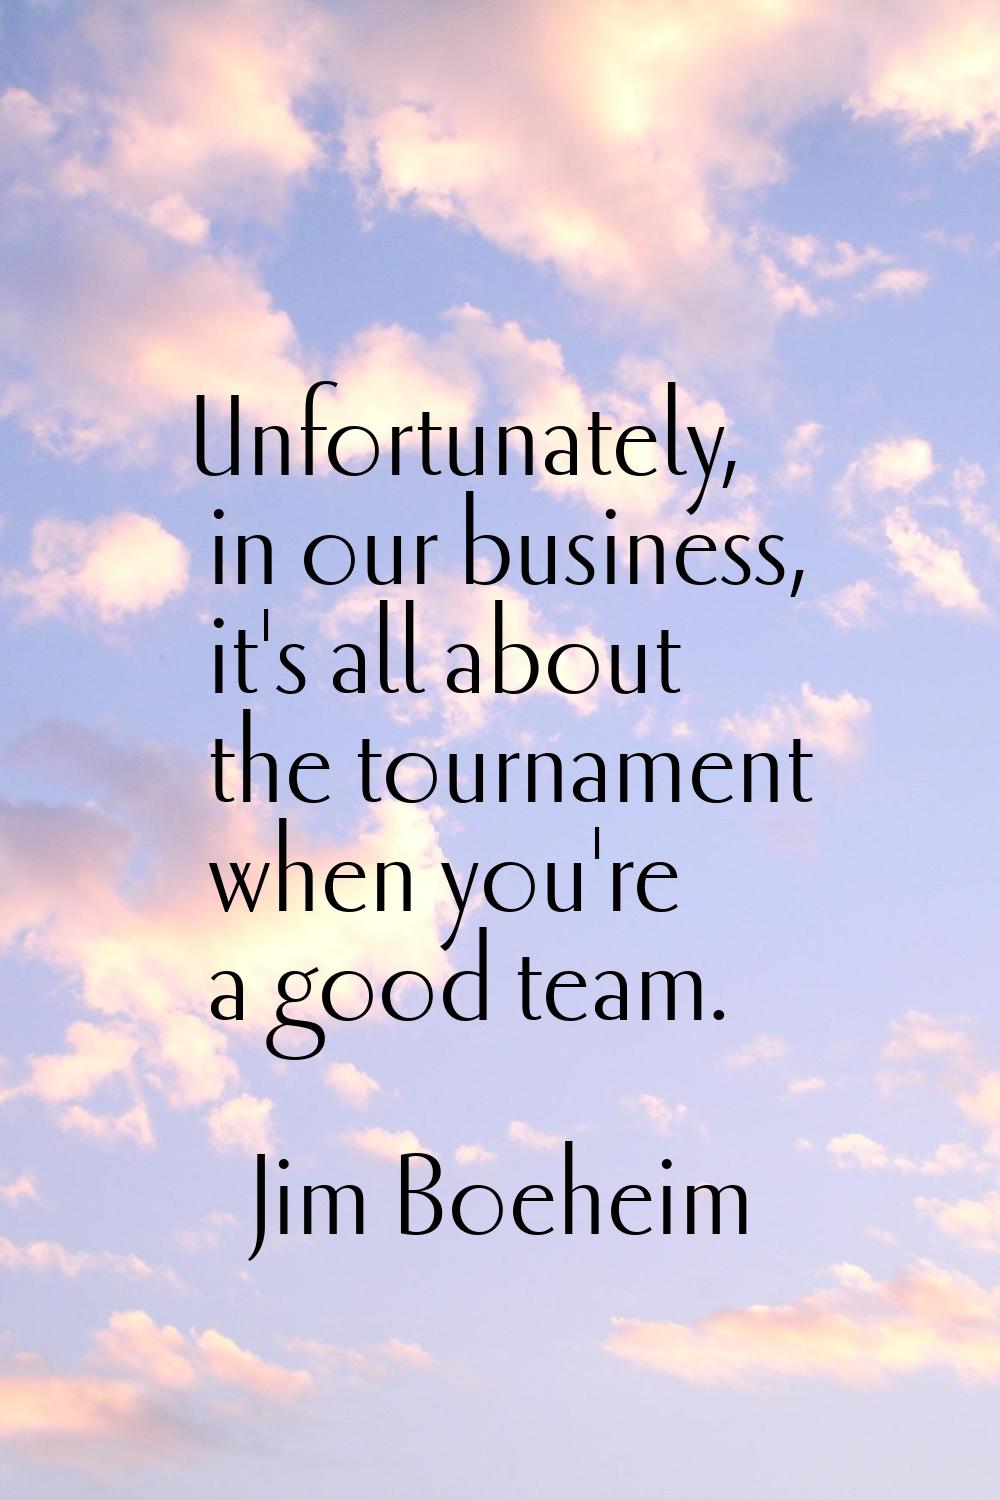 Unfortunately, in our business, it's all about the tournament when you're a good team.